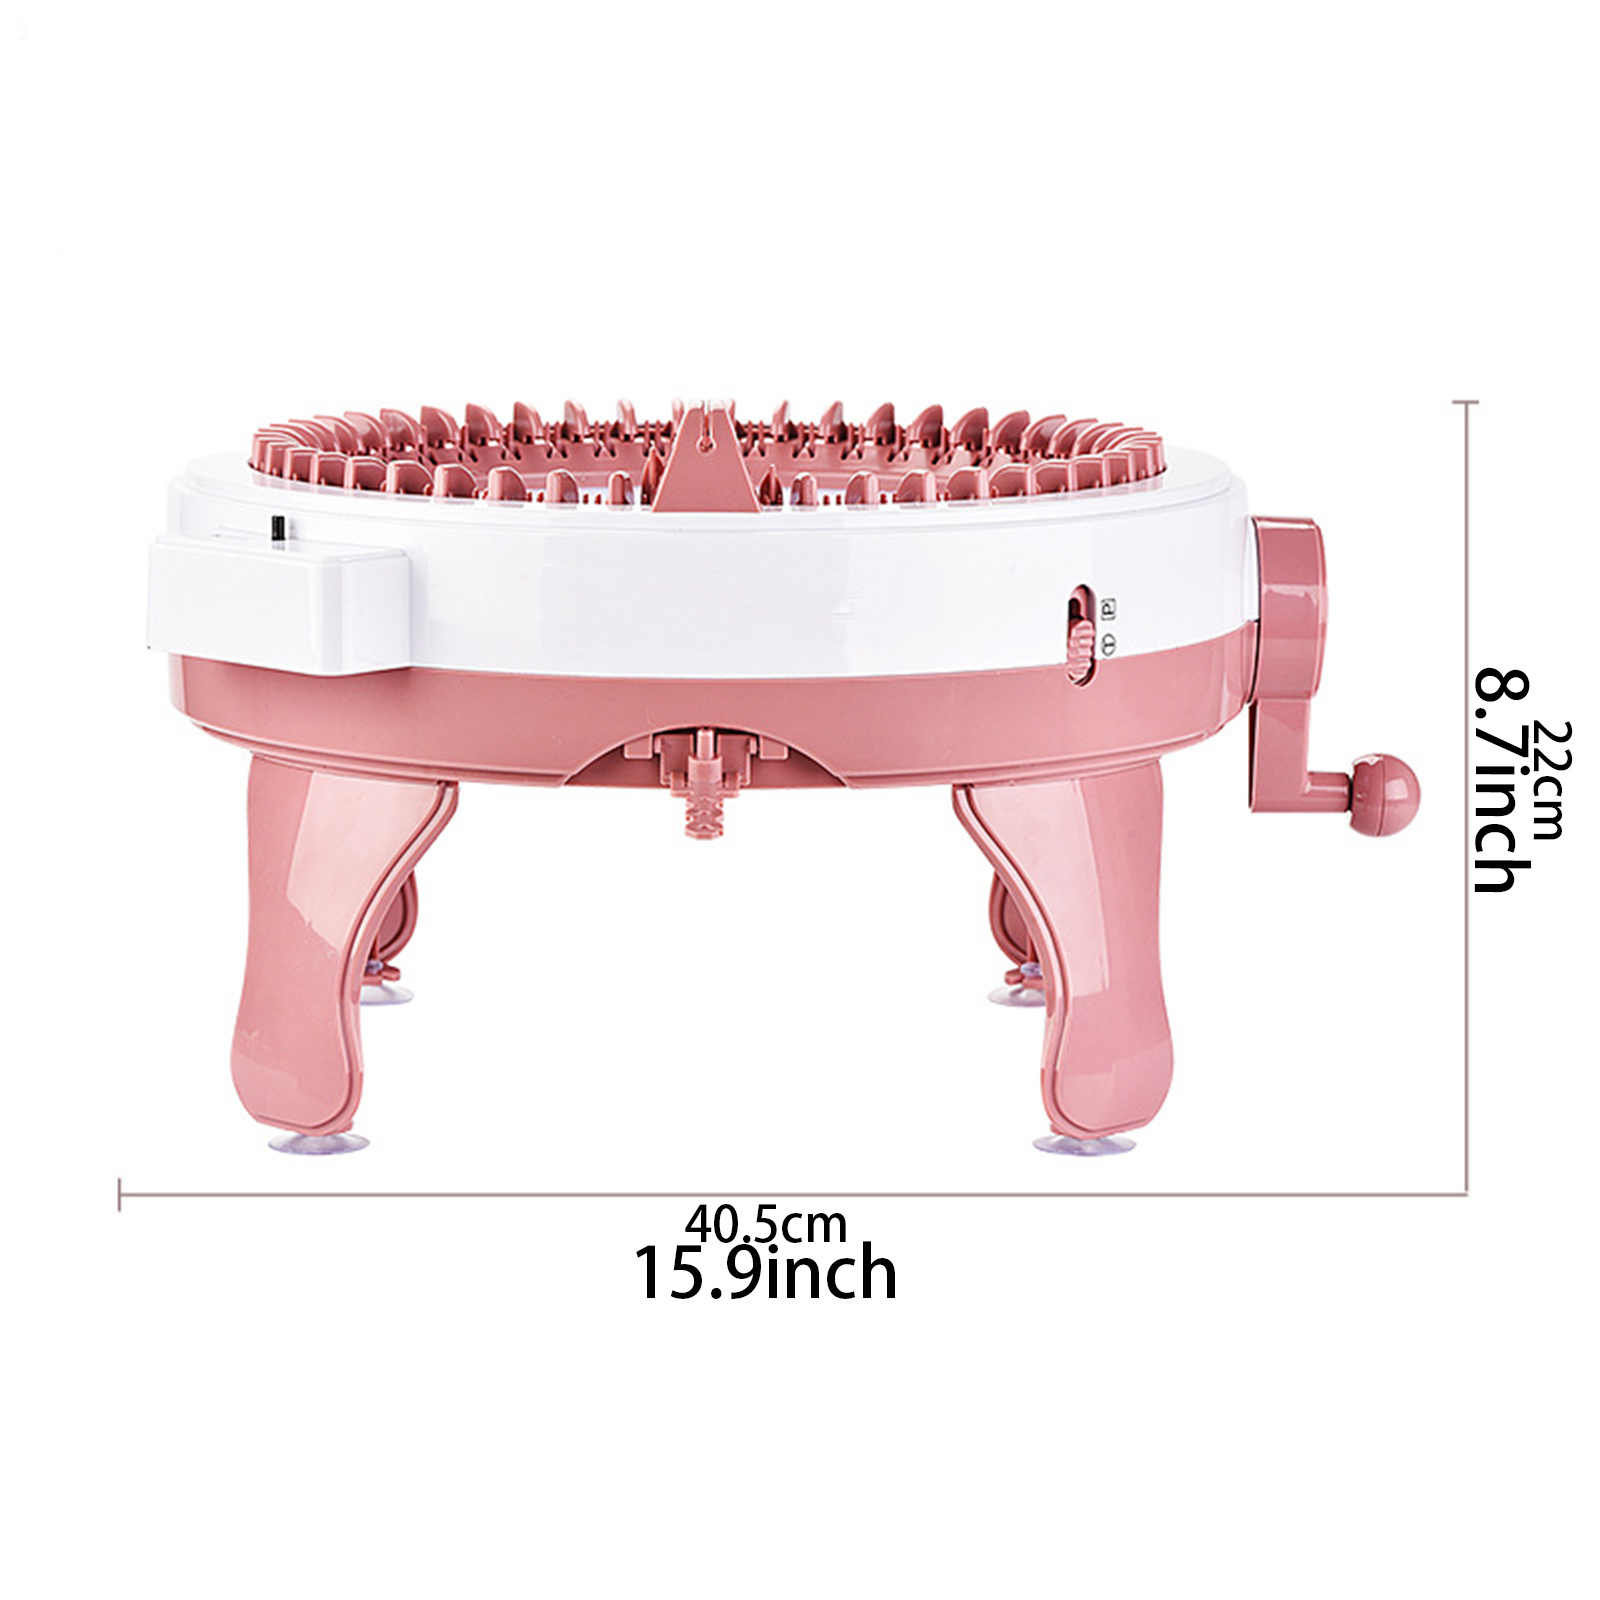 48 Needles Knitting Machines with Row Counter, Smart Weaving Loom Knitting Round Loom for Adults/Kids, Knitting Board Rotating Double Knit Loom Machin